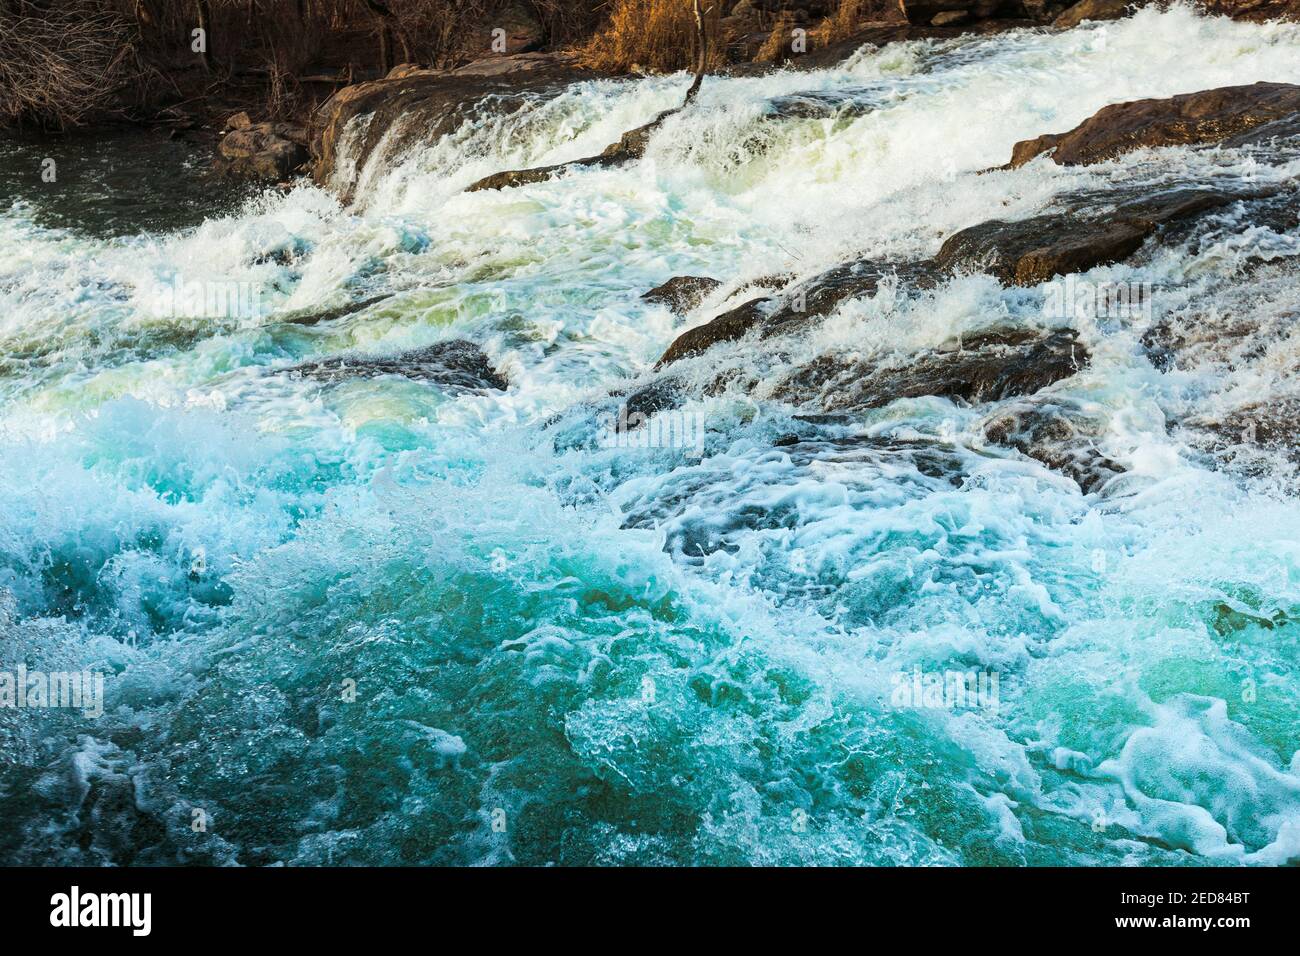 A seething waterfall spills through the rocky valley at the winter. Water splashes with foam on the waves. Stock Photo